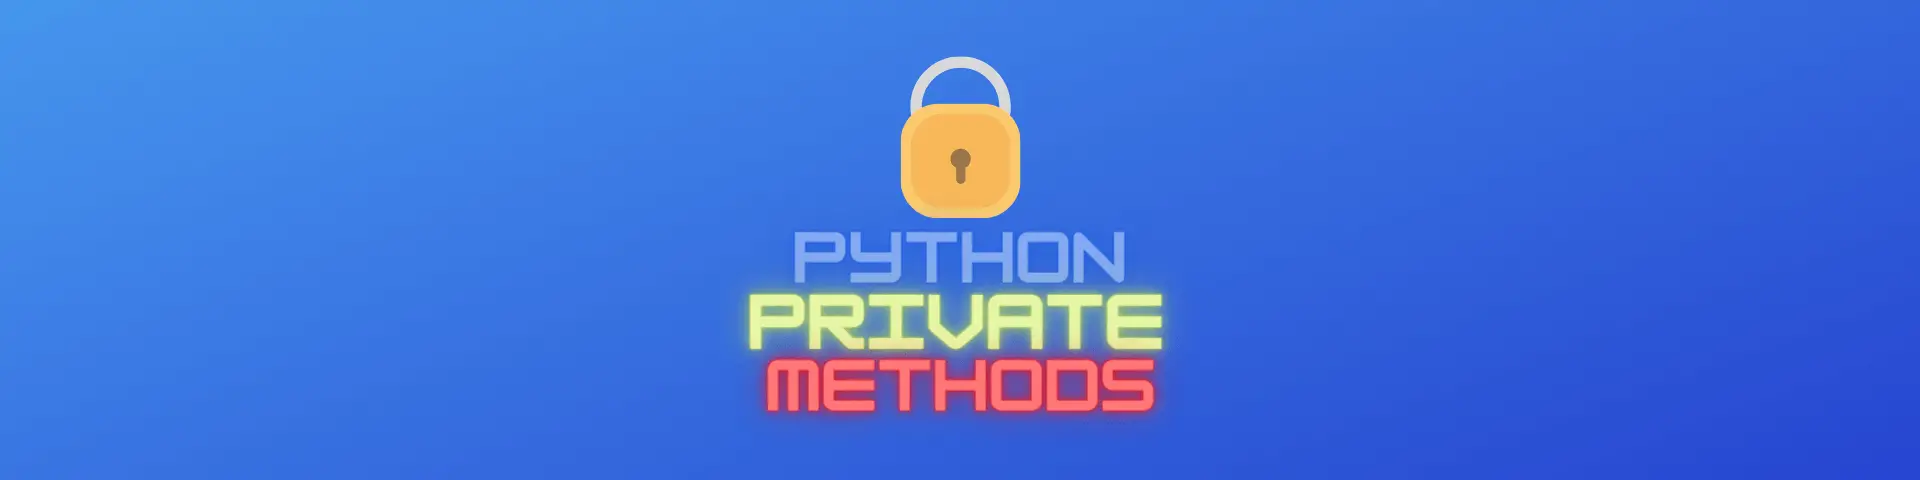 Private Methods in Python